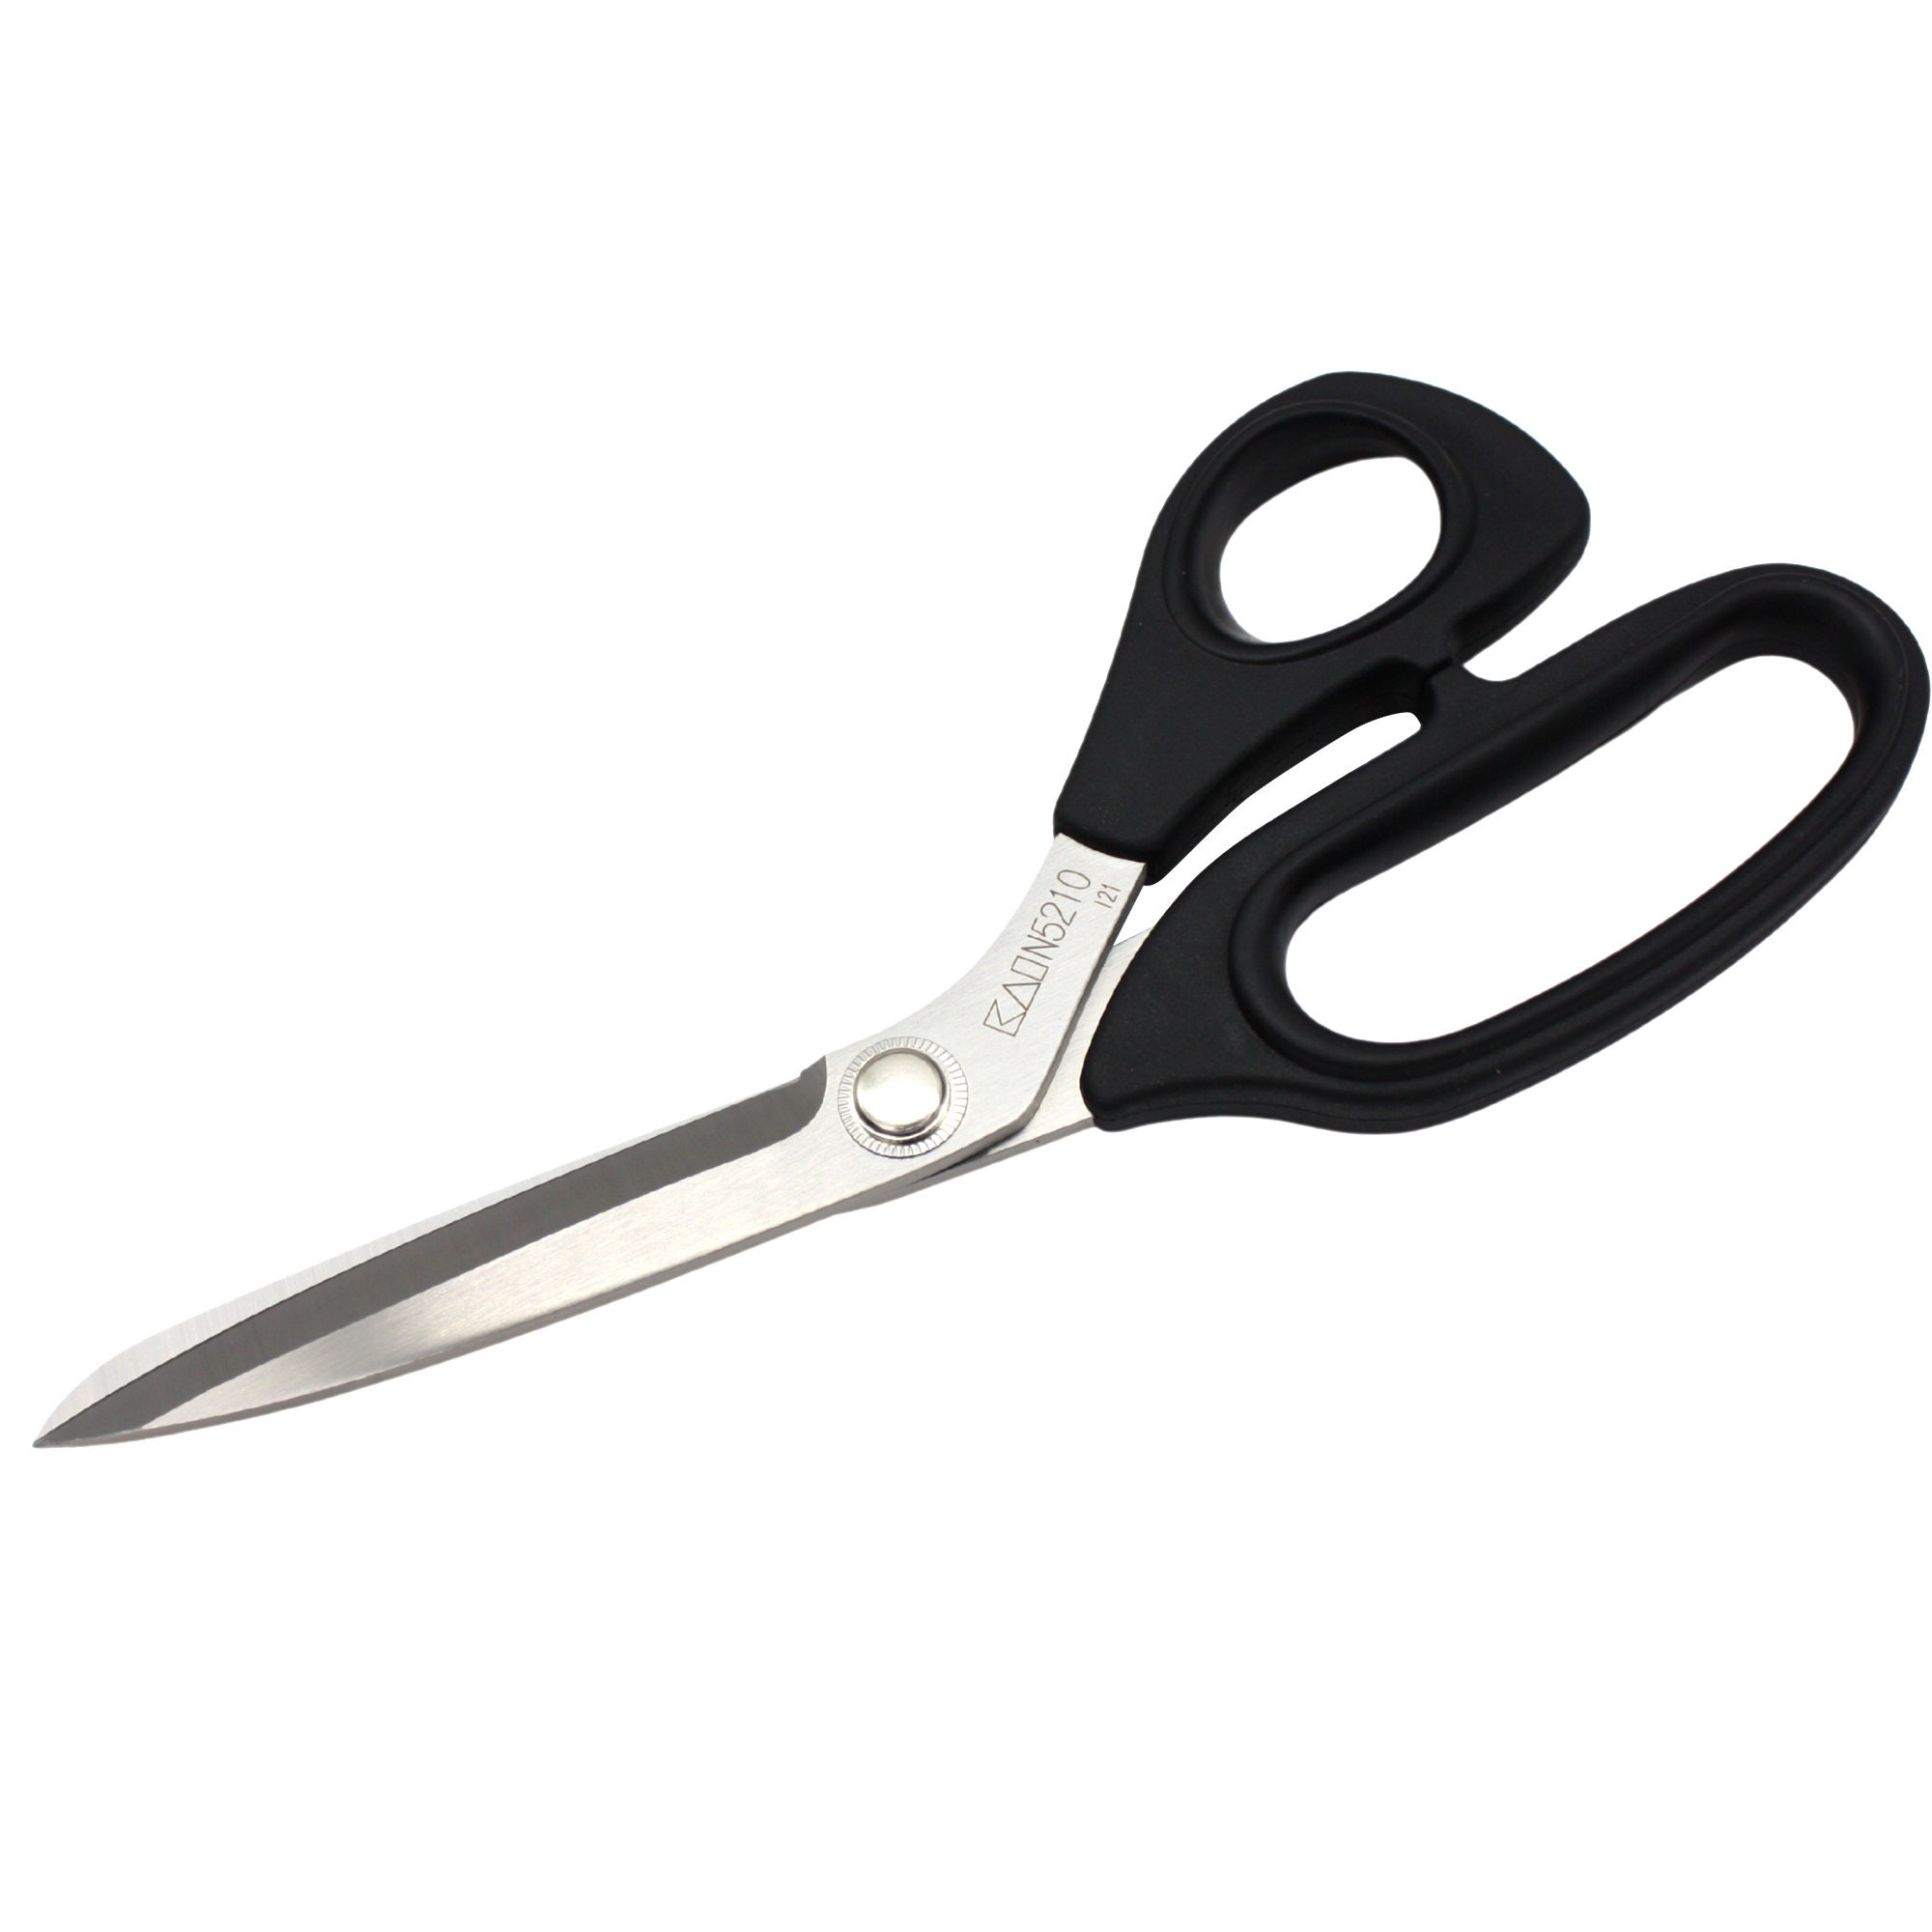 BAI Left Handed Fabric Scissors 10in Professional Heavy Duty Dressmaking  Shears for Leather Sewing Embroidery